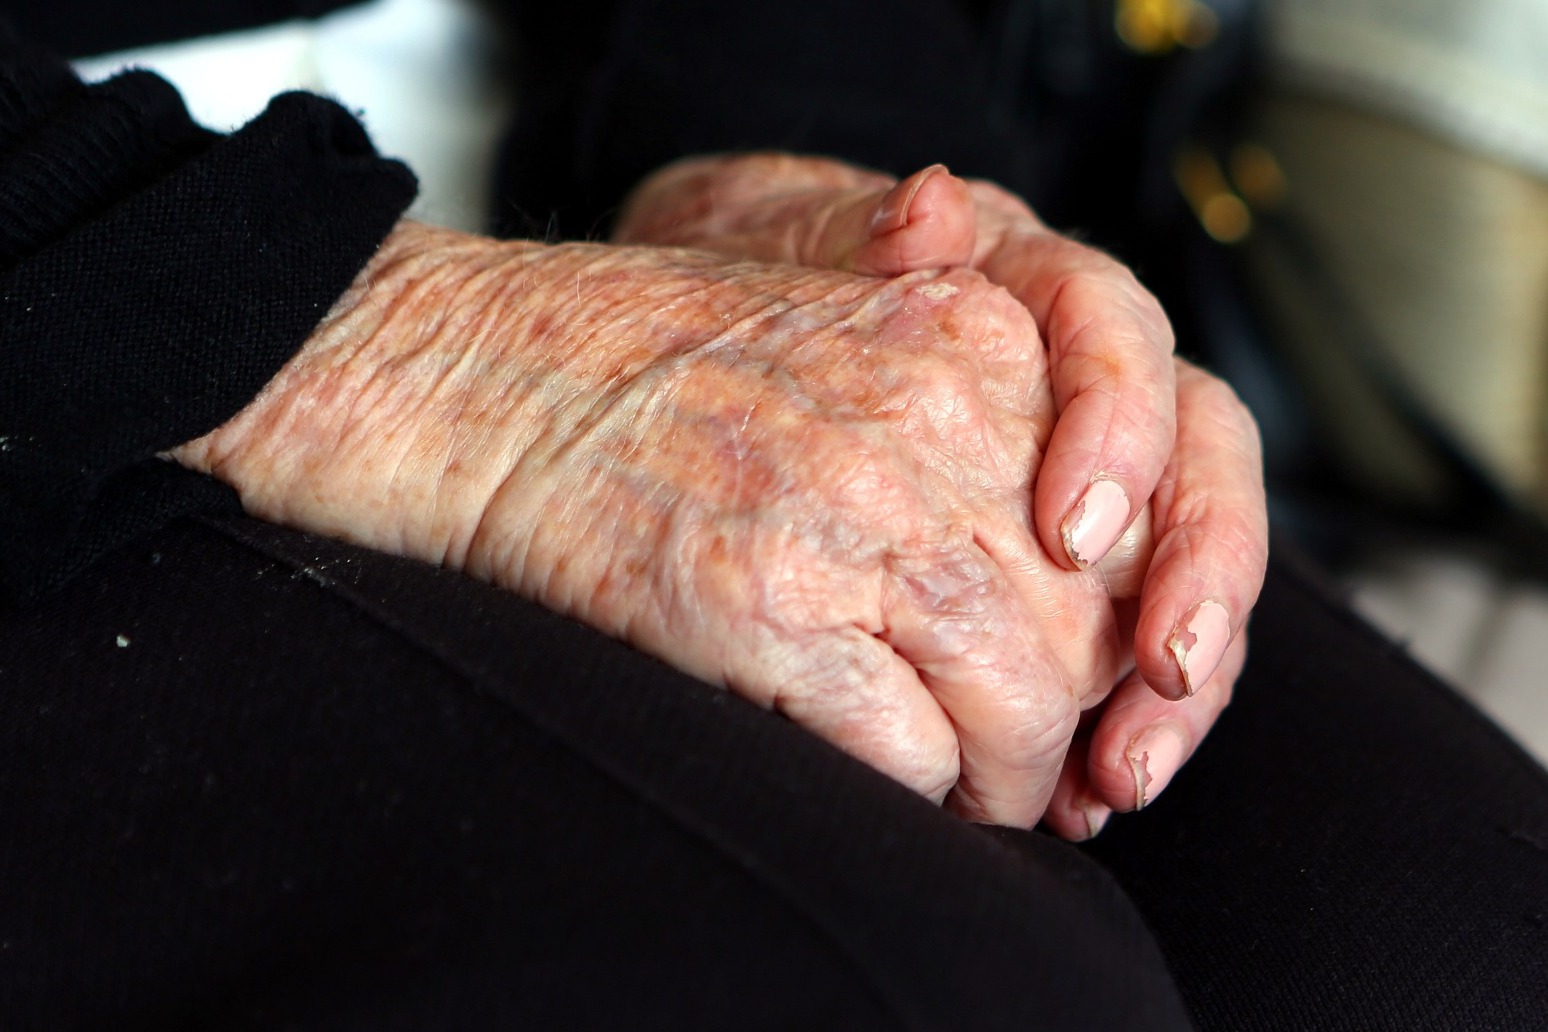 Dementia is ‘biggest health crisis of our time’, warns charity chief 